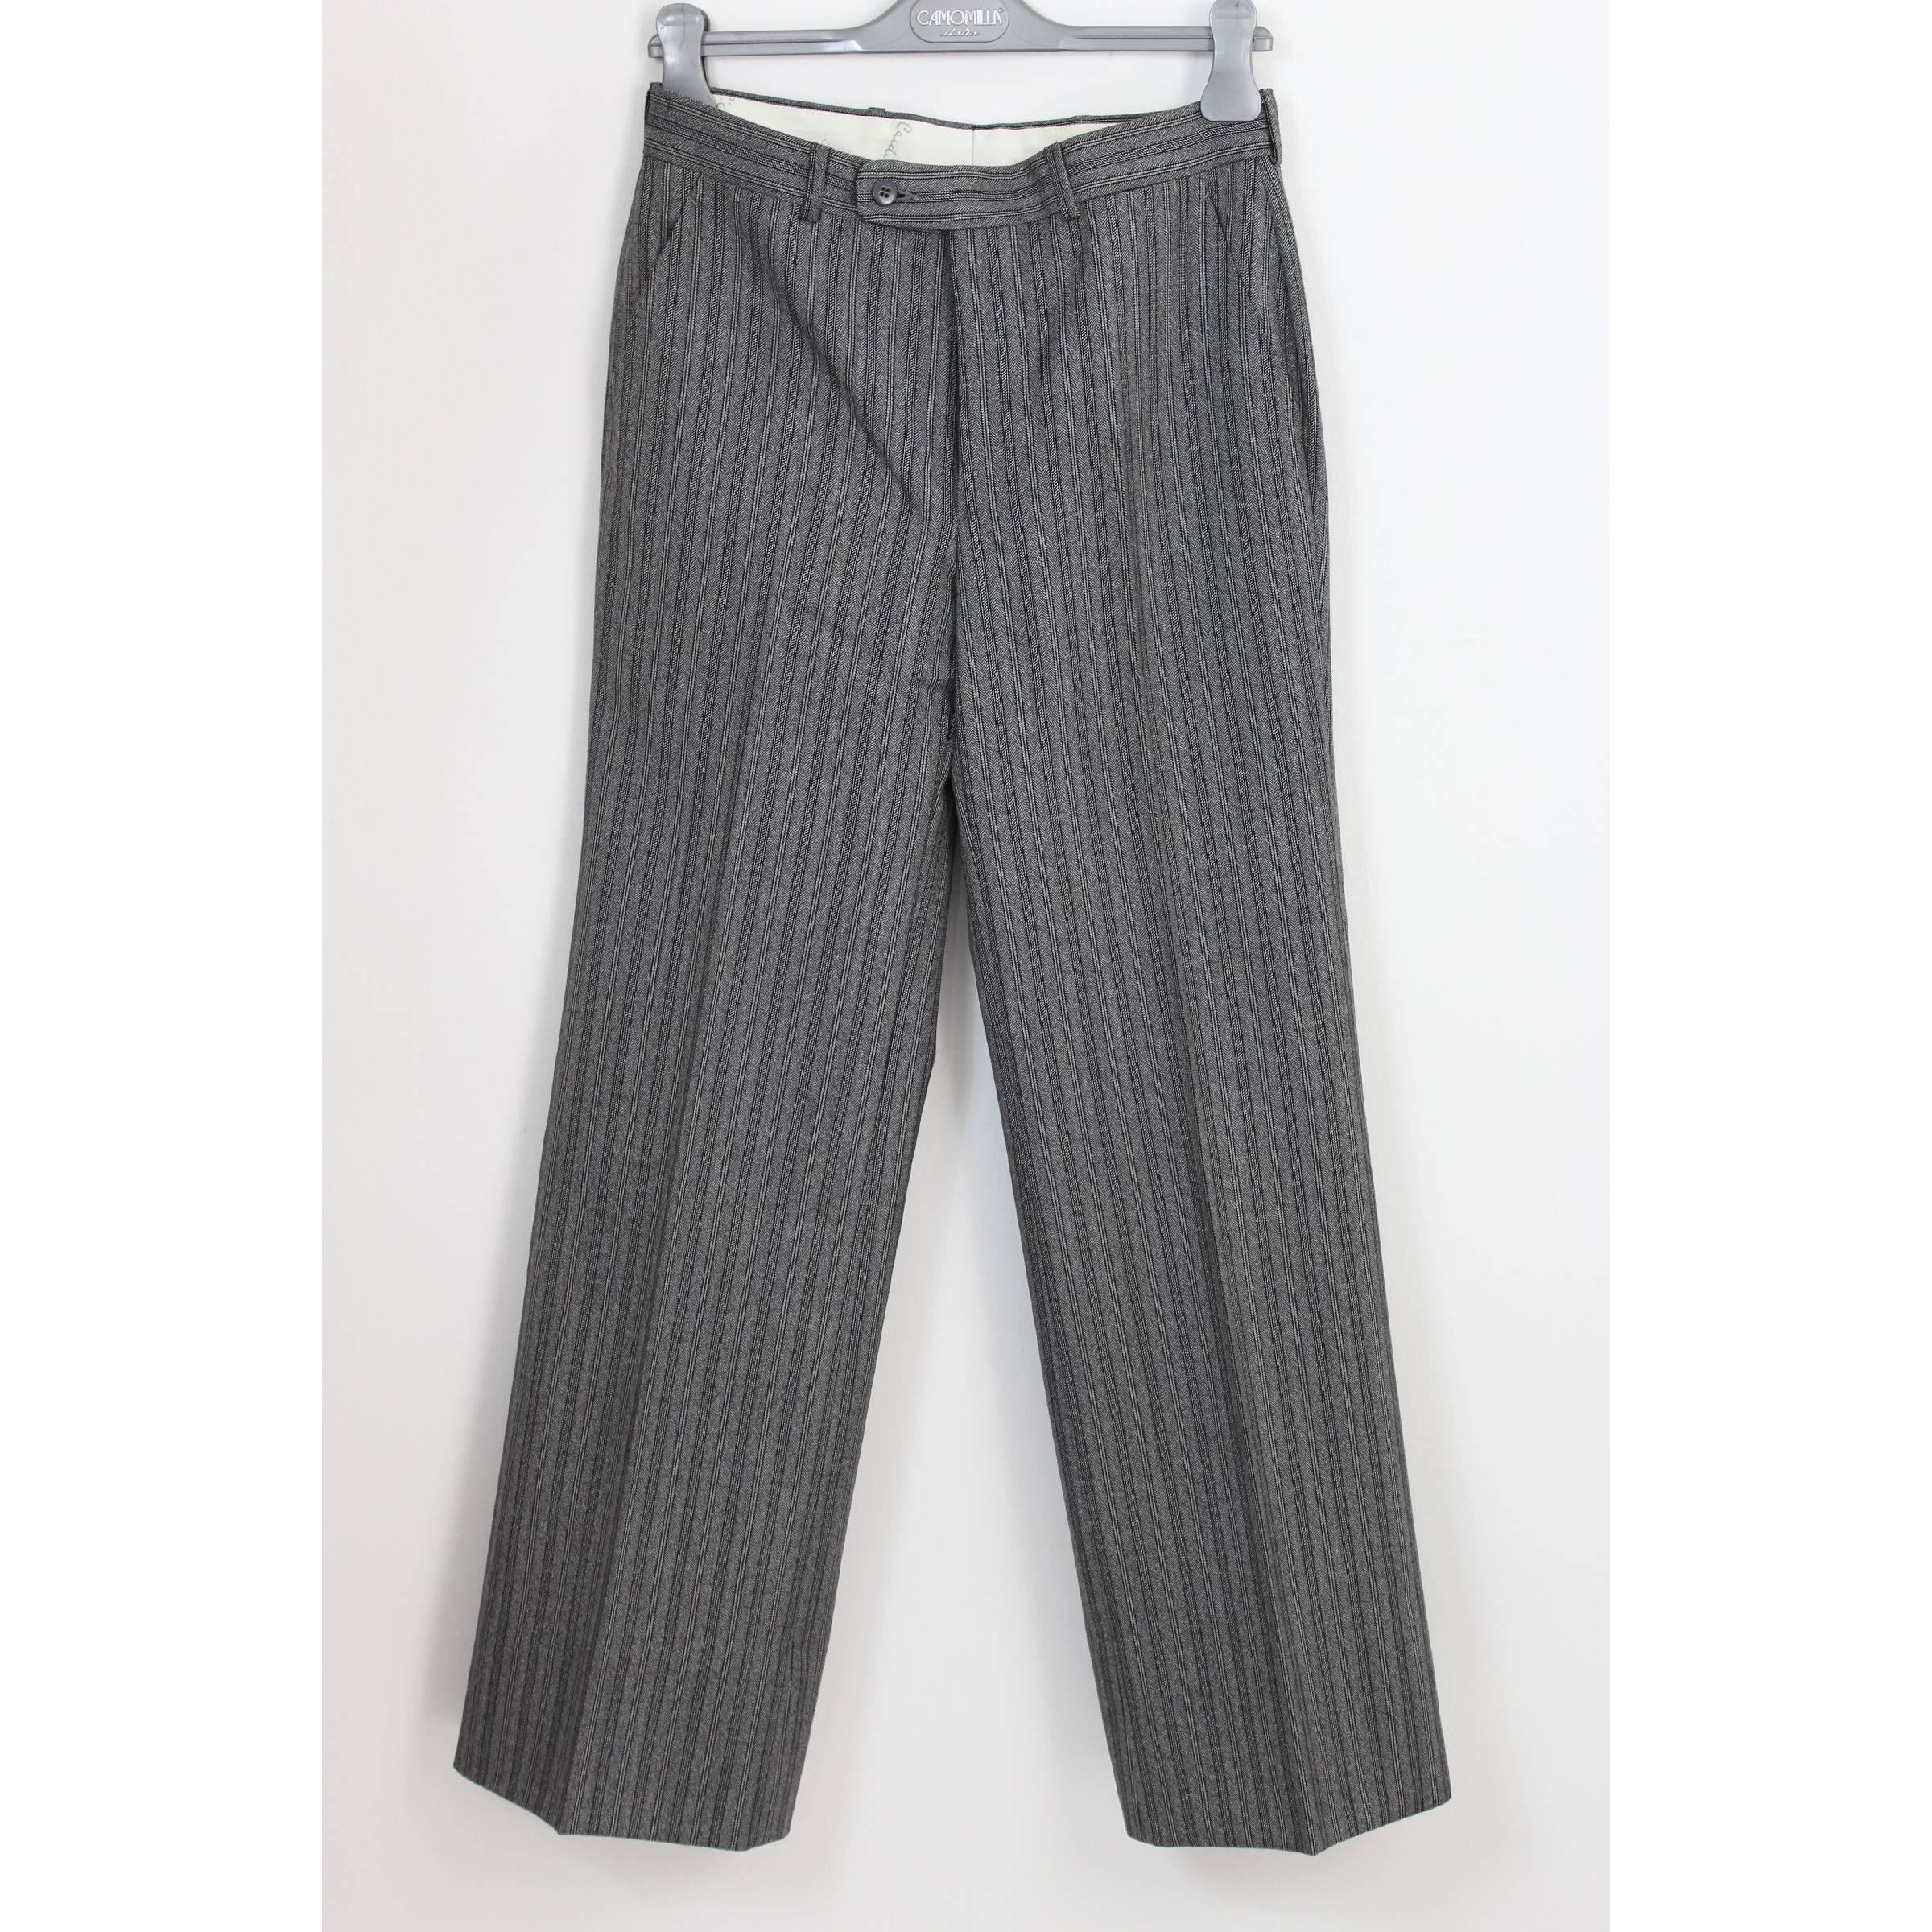 Pierre Cardin Suit Pants Gray and Black Wool France Smoking, 1990s For Sale 1